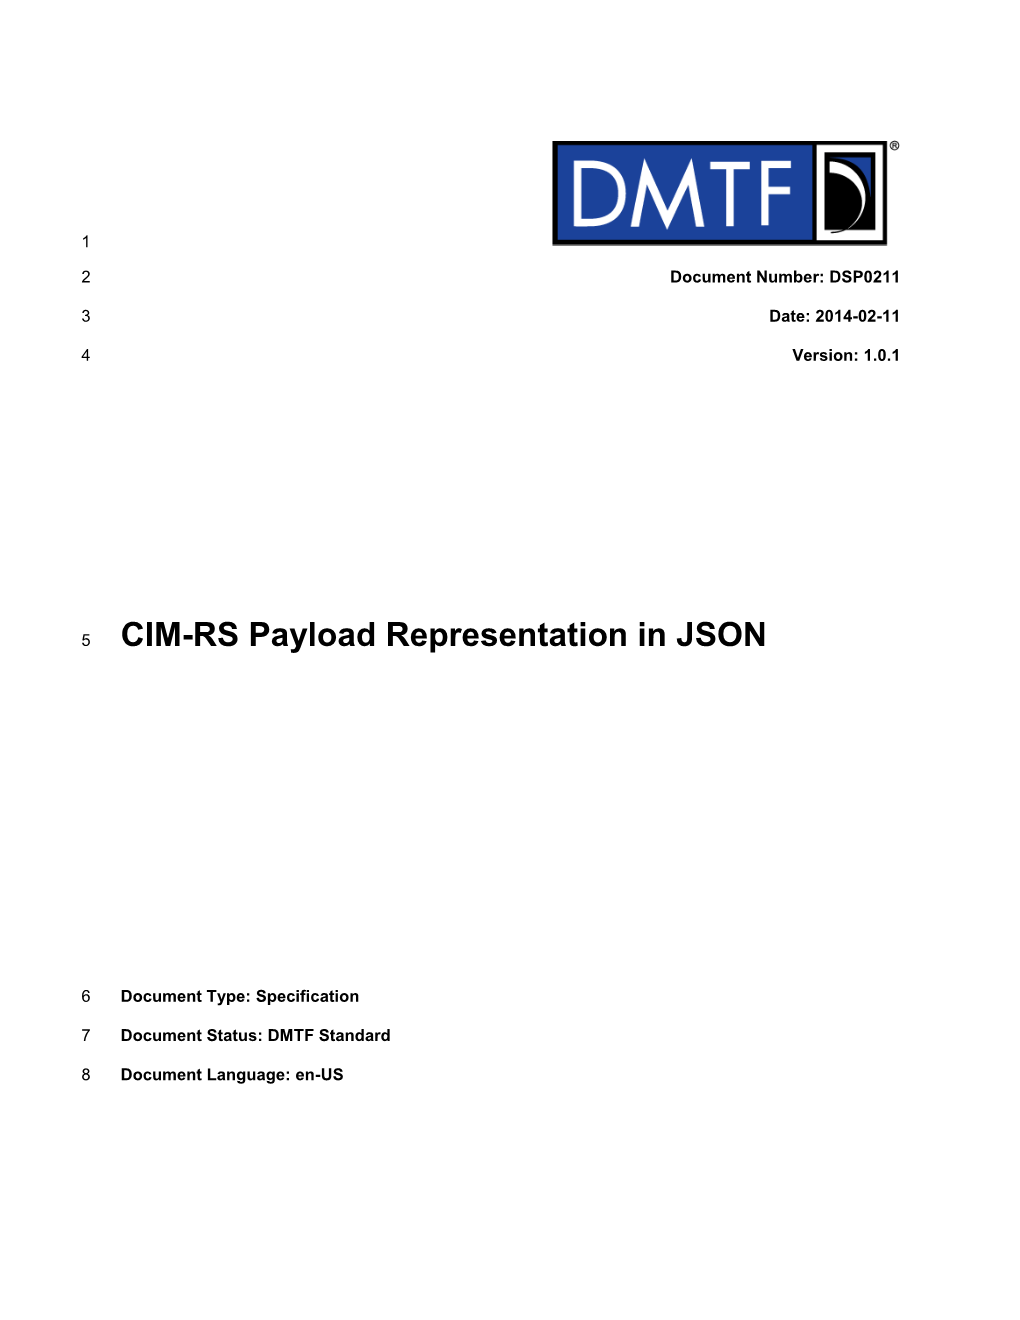 CIM-RS Payload Representation in JSON